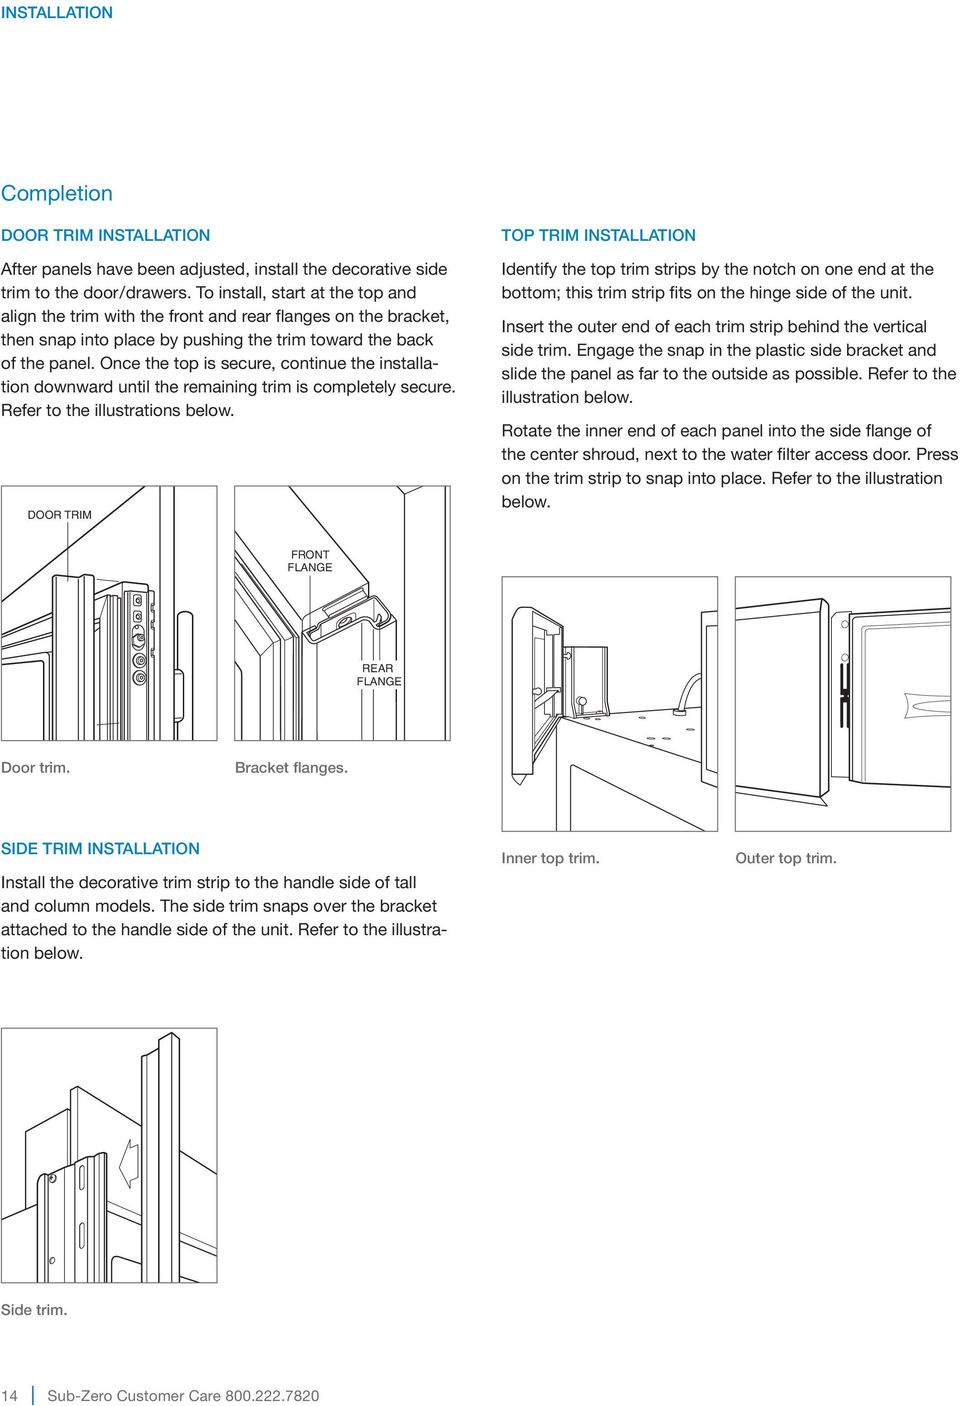 Once the top is secure, continue the installation downward until the remaining trim is completely secure. Refer to the illustrations below.